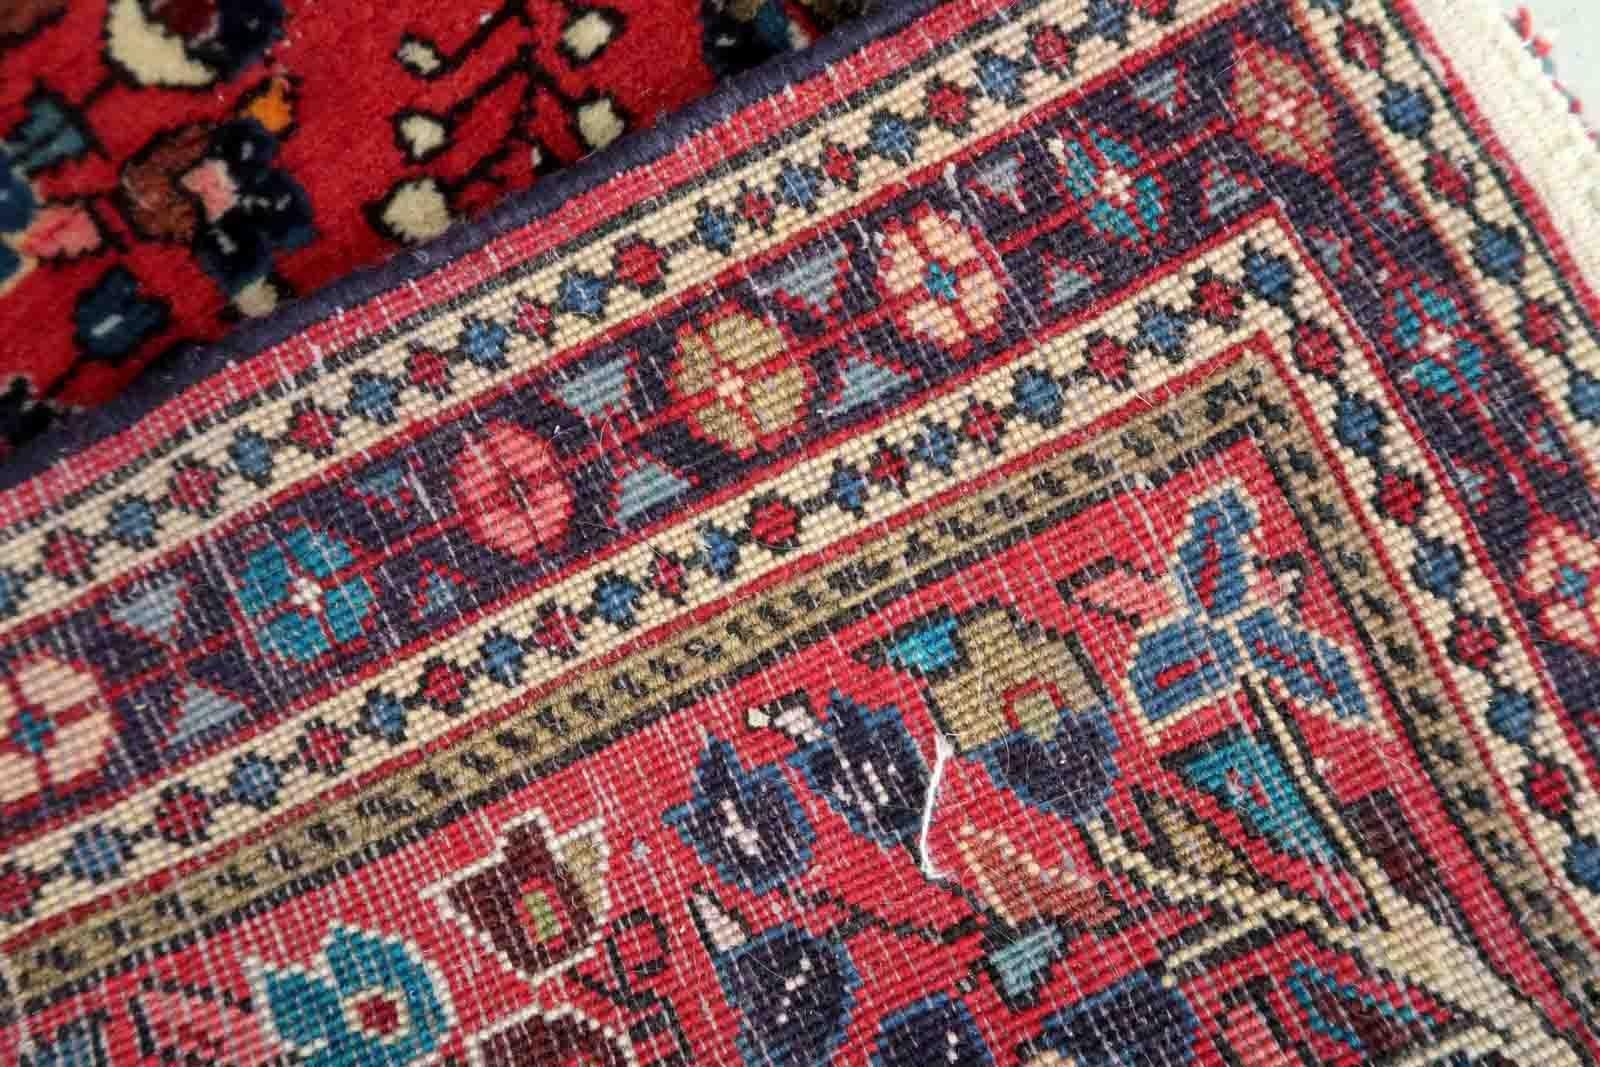 Handmade vintage Sarouk rug in traditional design. The rug is in red color. The rug is from the end of 20th century in original good condition.

-condition: original good,

-circa: 1970s,

-size: 2.1' x 4.2' (66cm x 130cm),

-material: